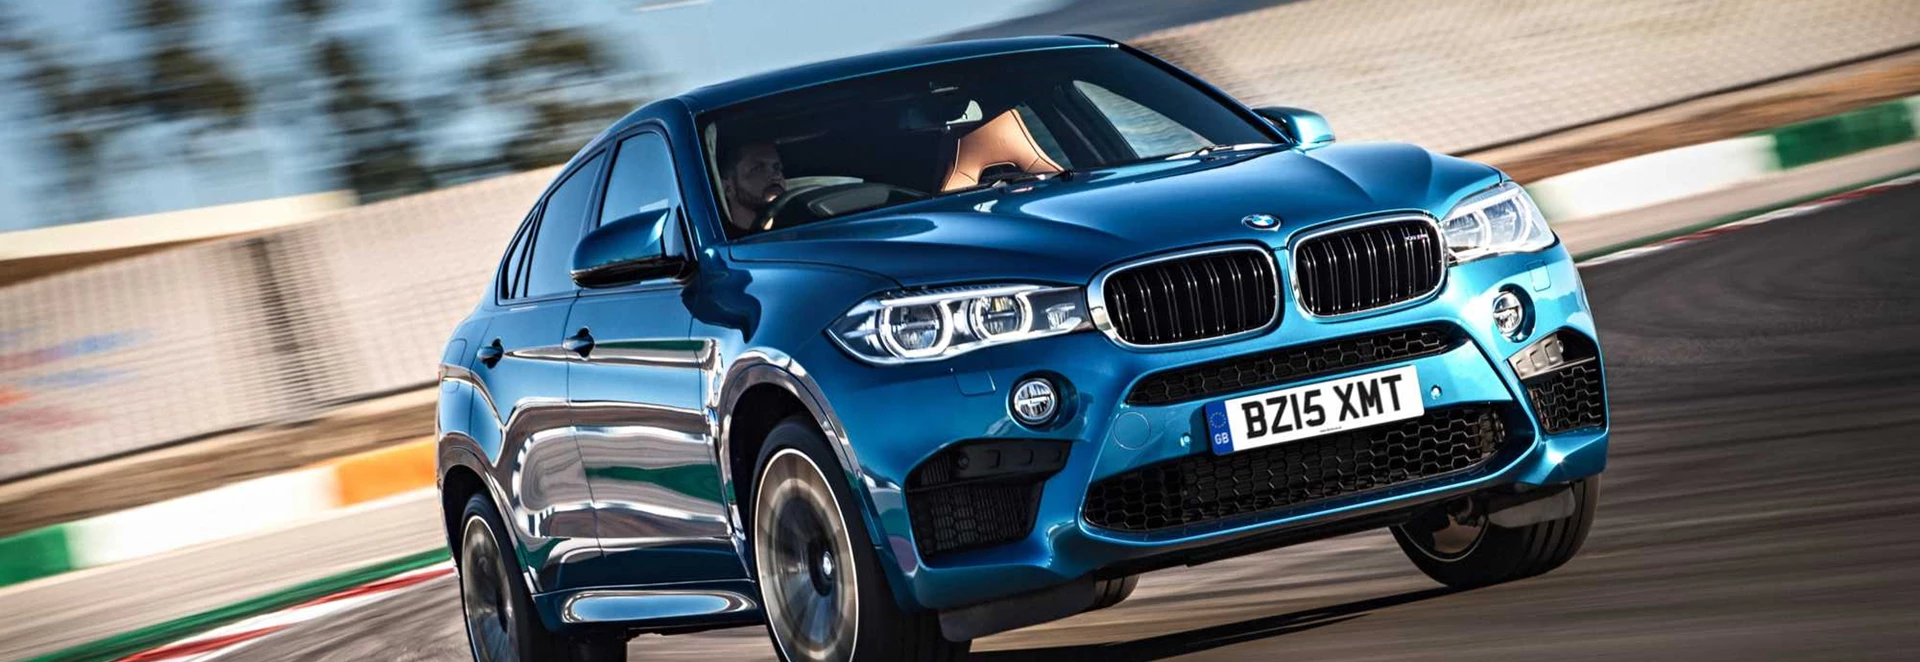 BMW X6 crossover review 